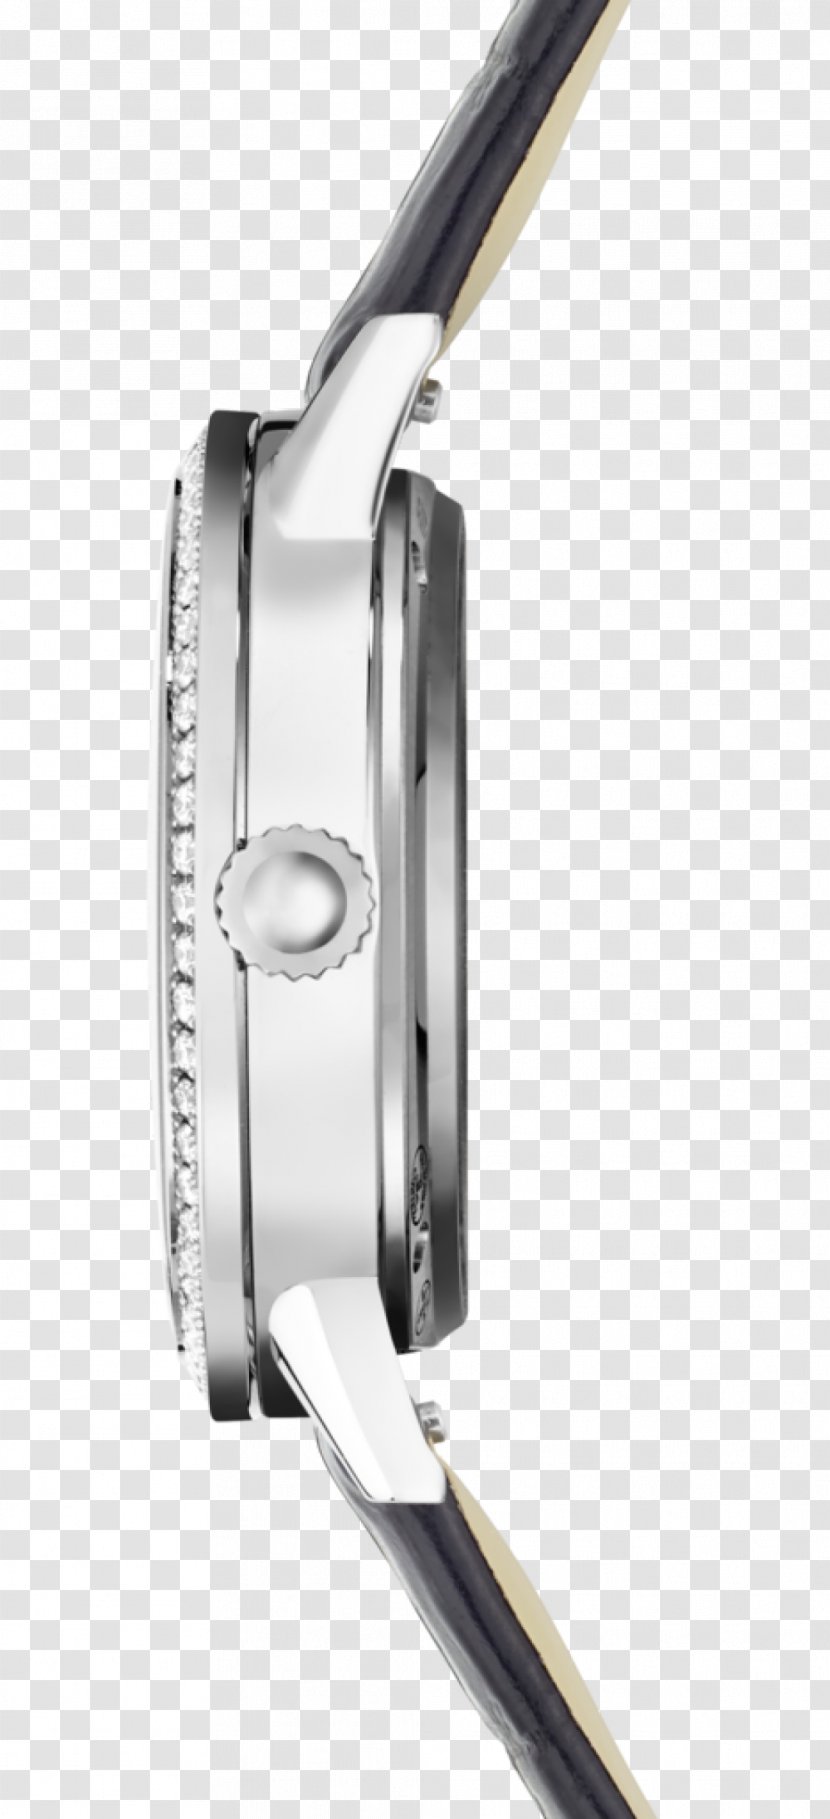 Jaeger-LeCoultre Watch Strap Jewellery Clock - Clothing Accessories Transparent PNG